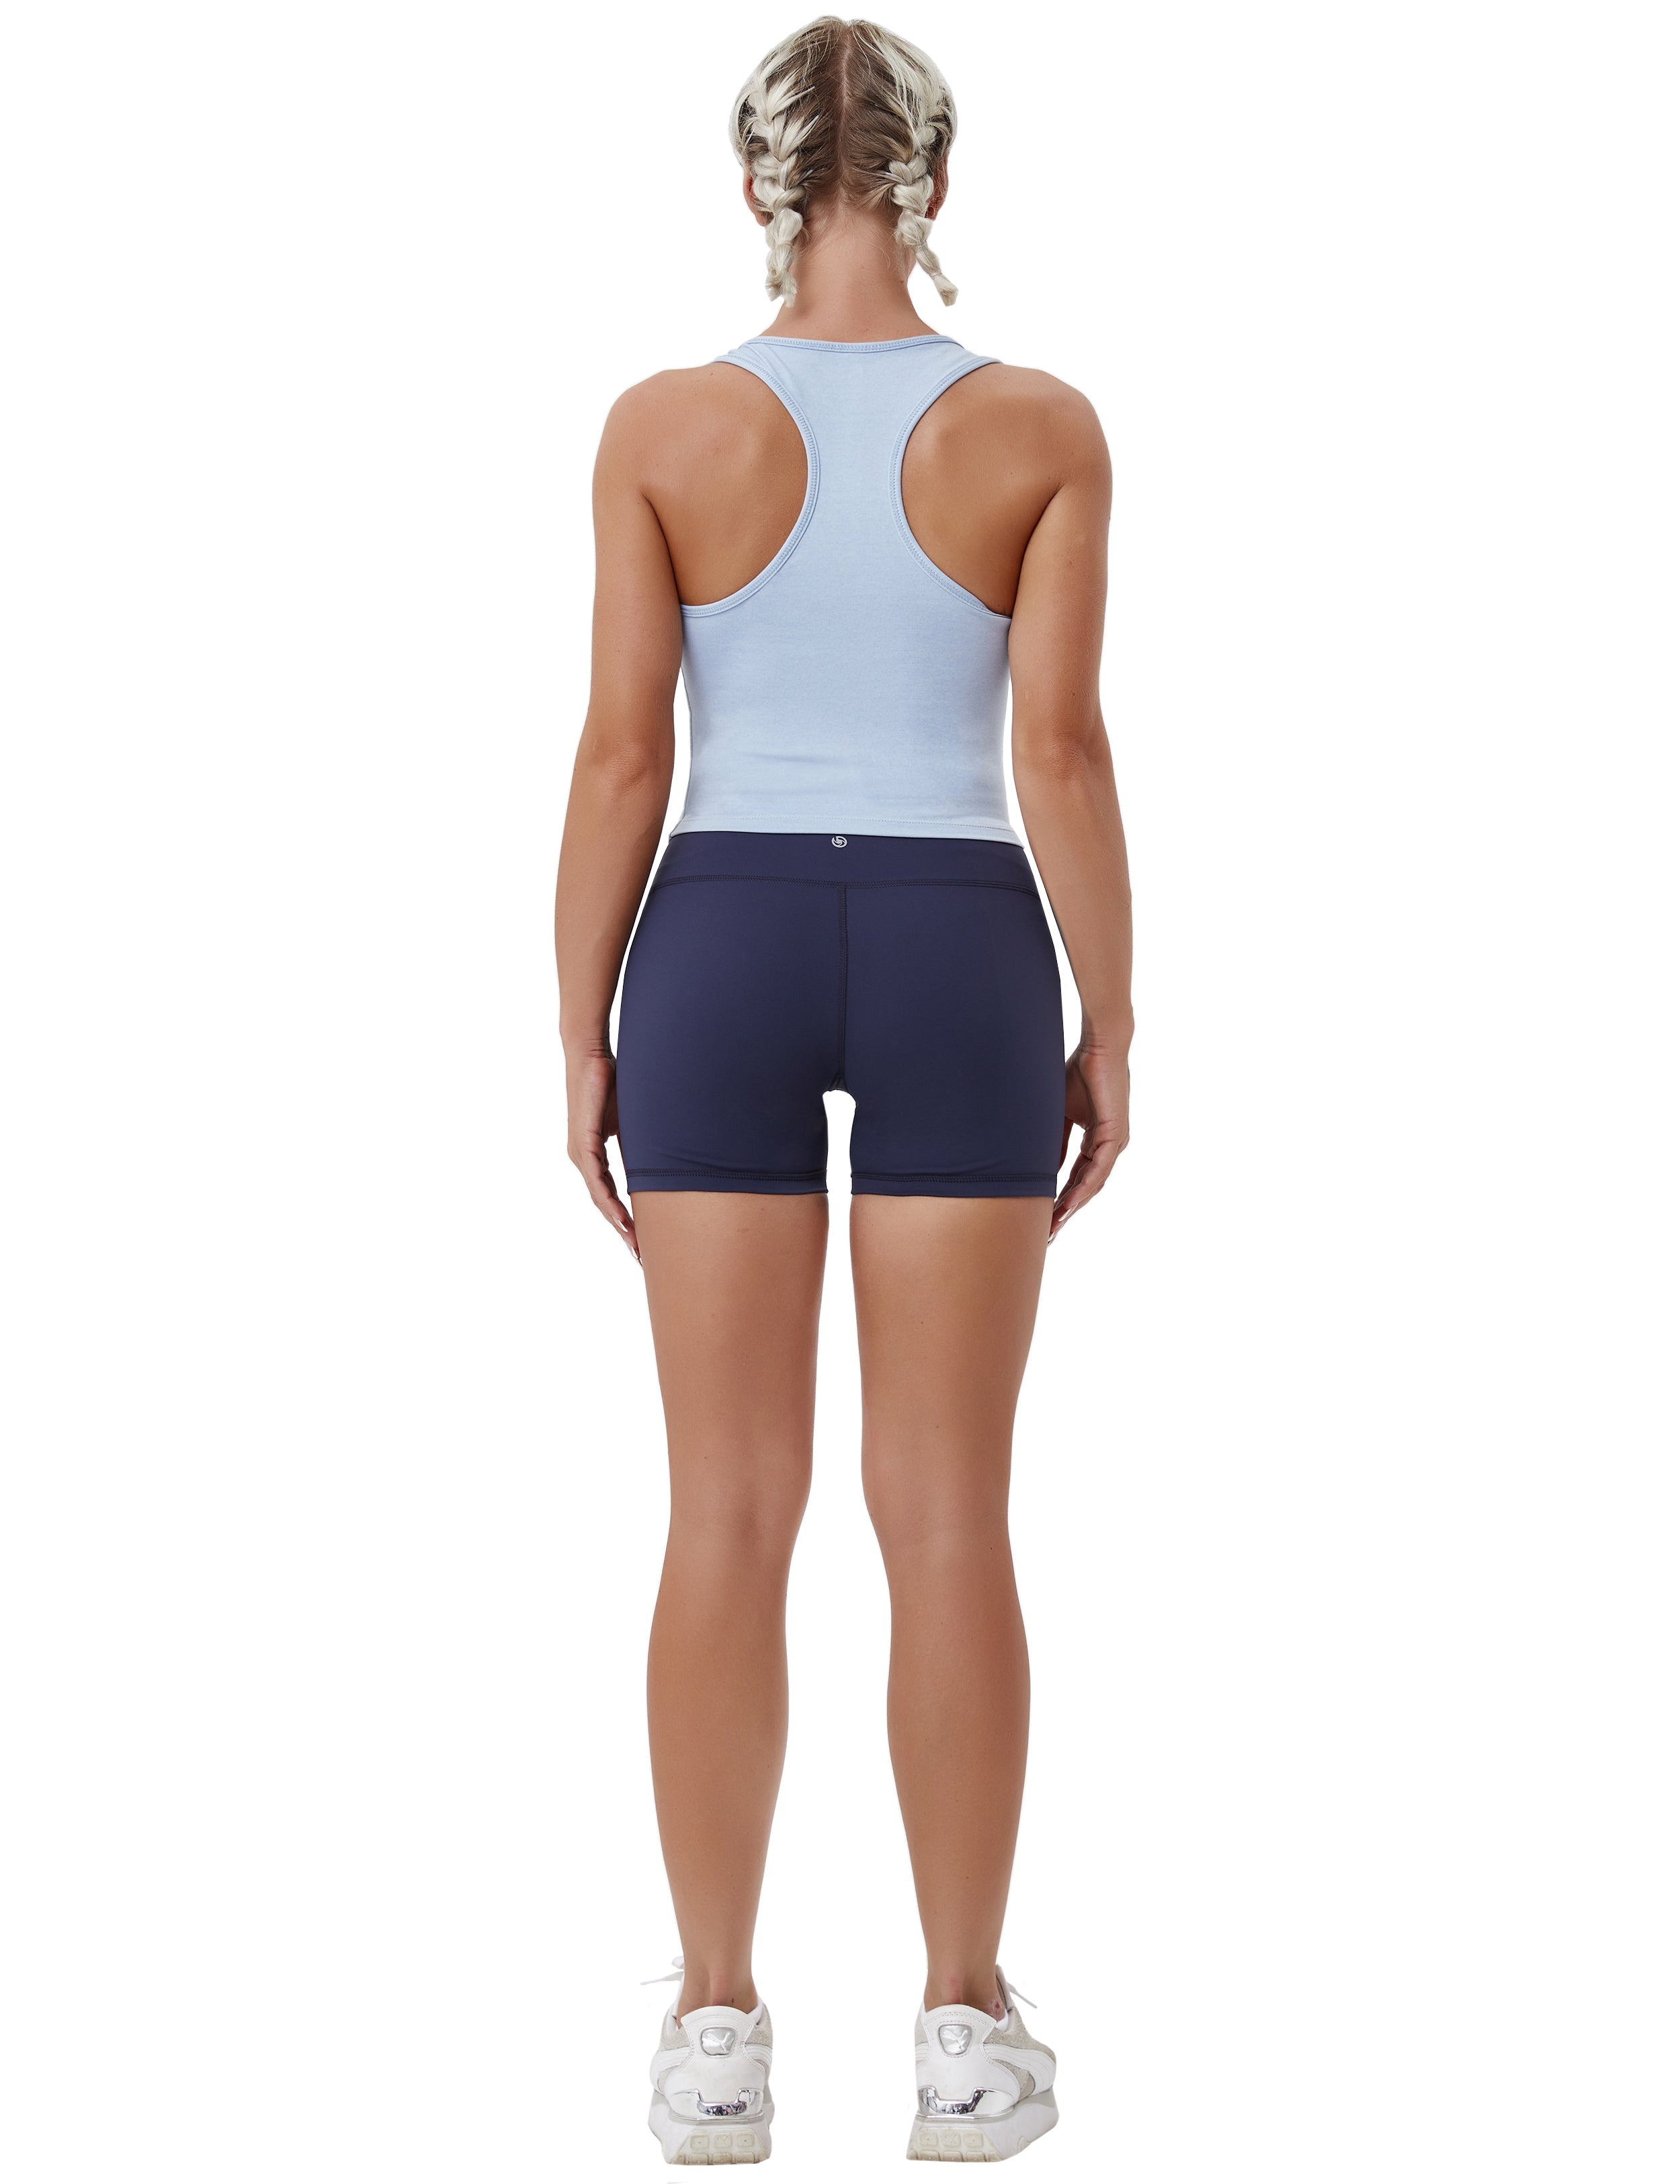 Racerback Athletic Crop Tank Tops heatherblue 92%Nylon/8%Spandex(Cotton Soft) Designed for Golf Tight Fit So buttery soft, it feels weightless Sweat-wicking Four-way stretch Breathable Contours your body Sits below the waistband for moderate, everyday coverage